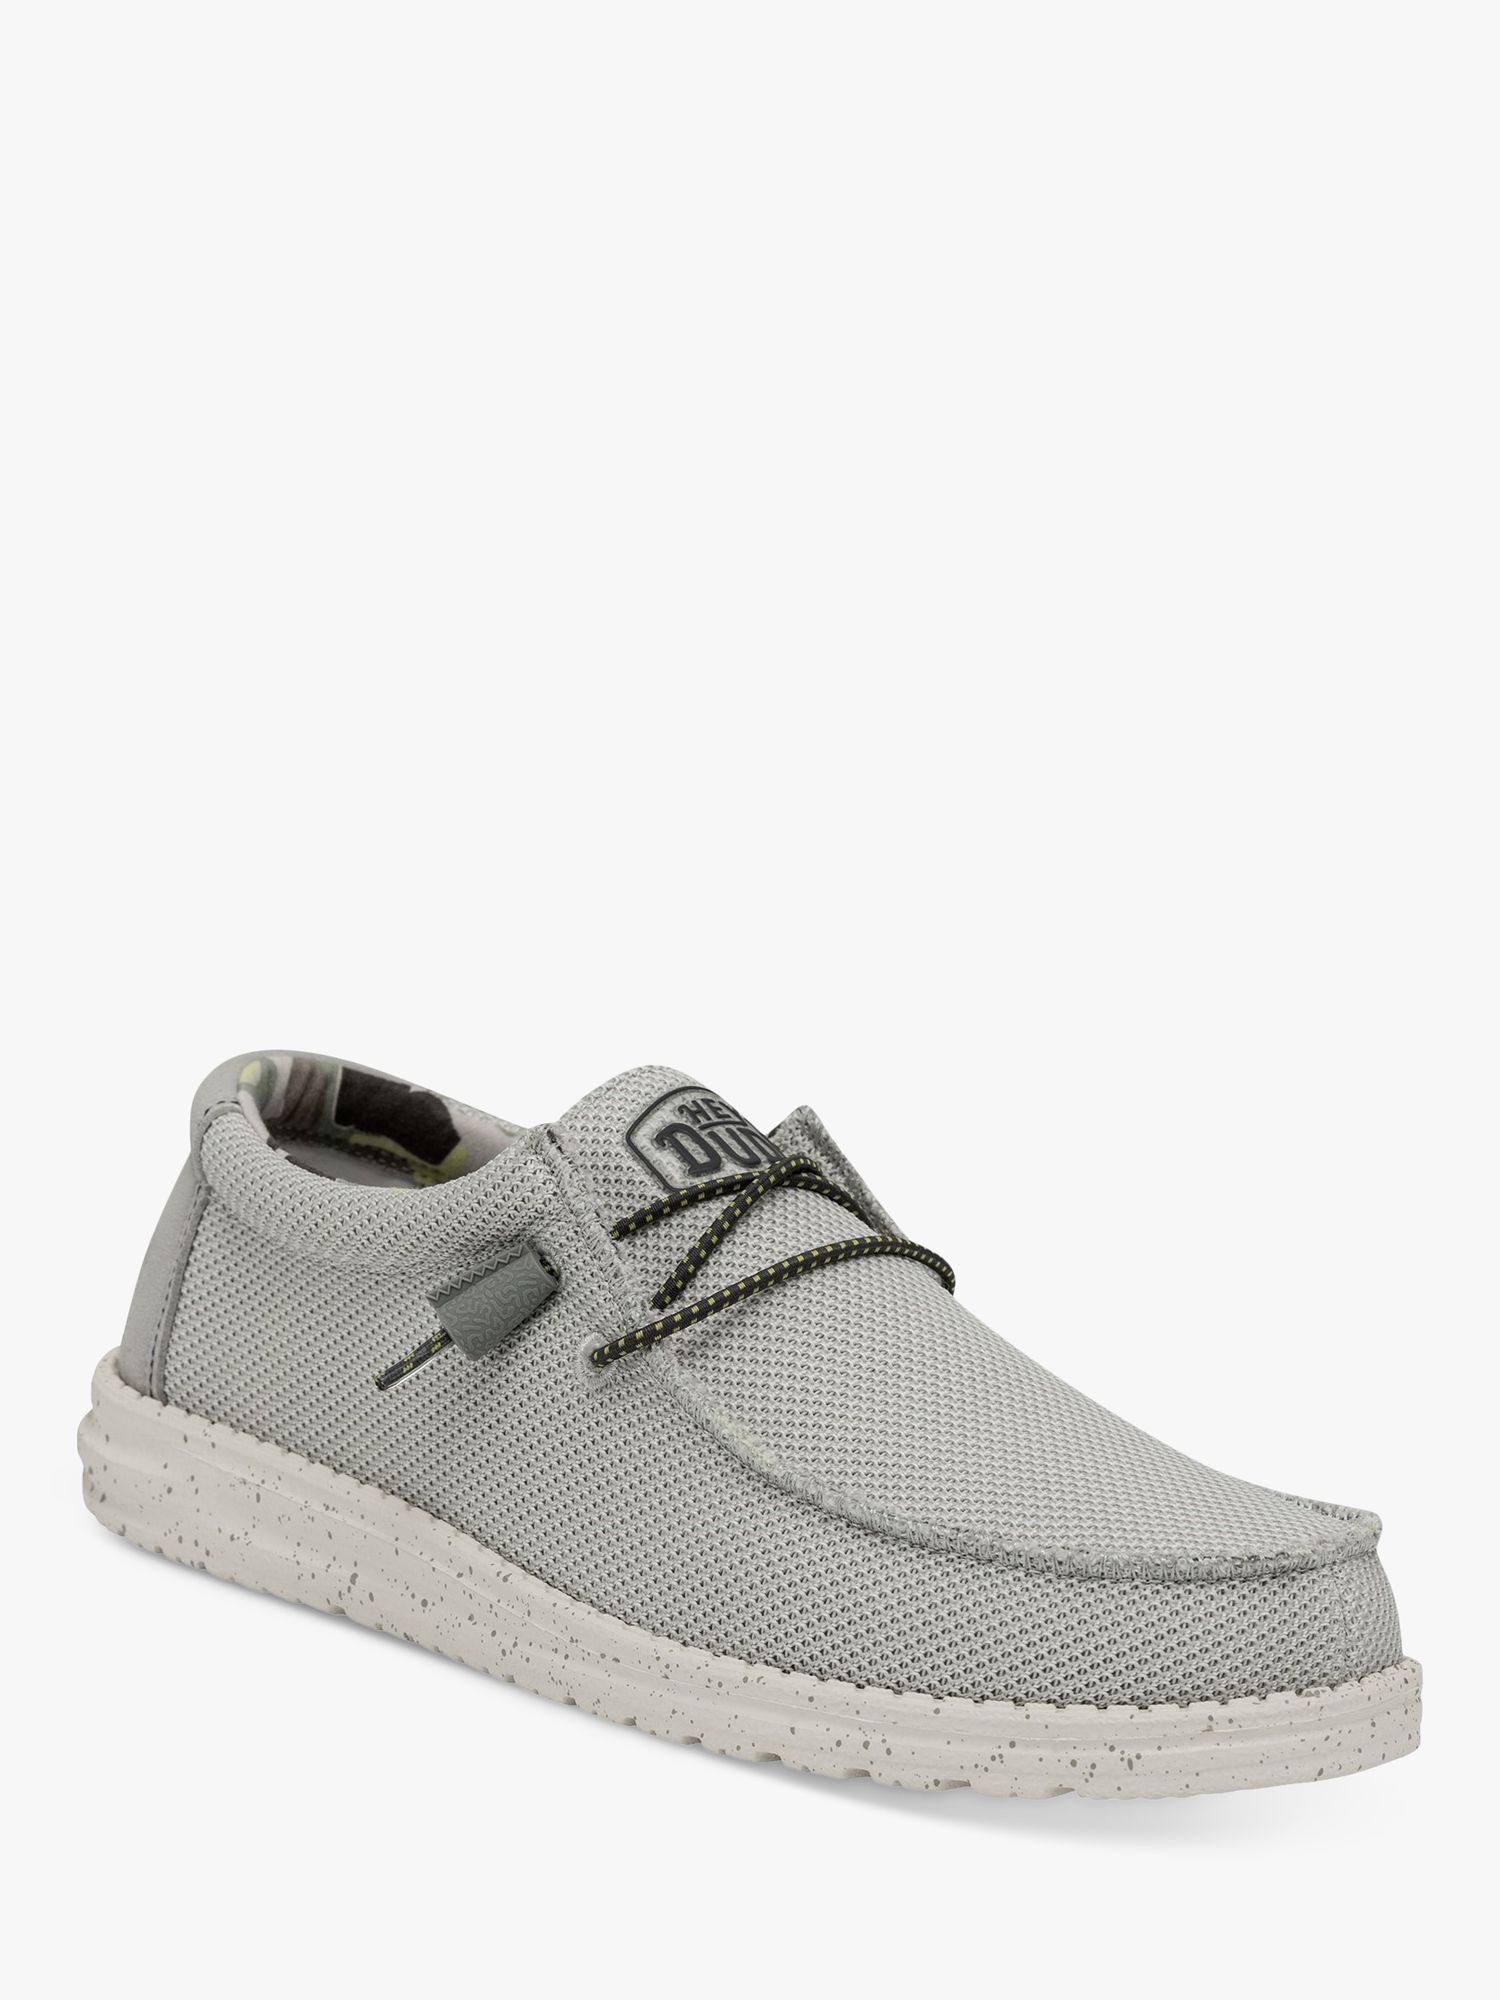 Hey Dude Wally Sox Triple Stitch Moccasins, Grey at John Lewis & Partners